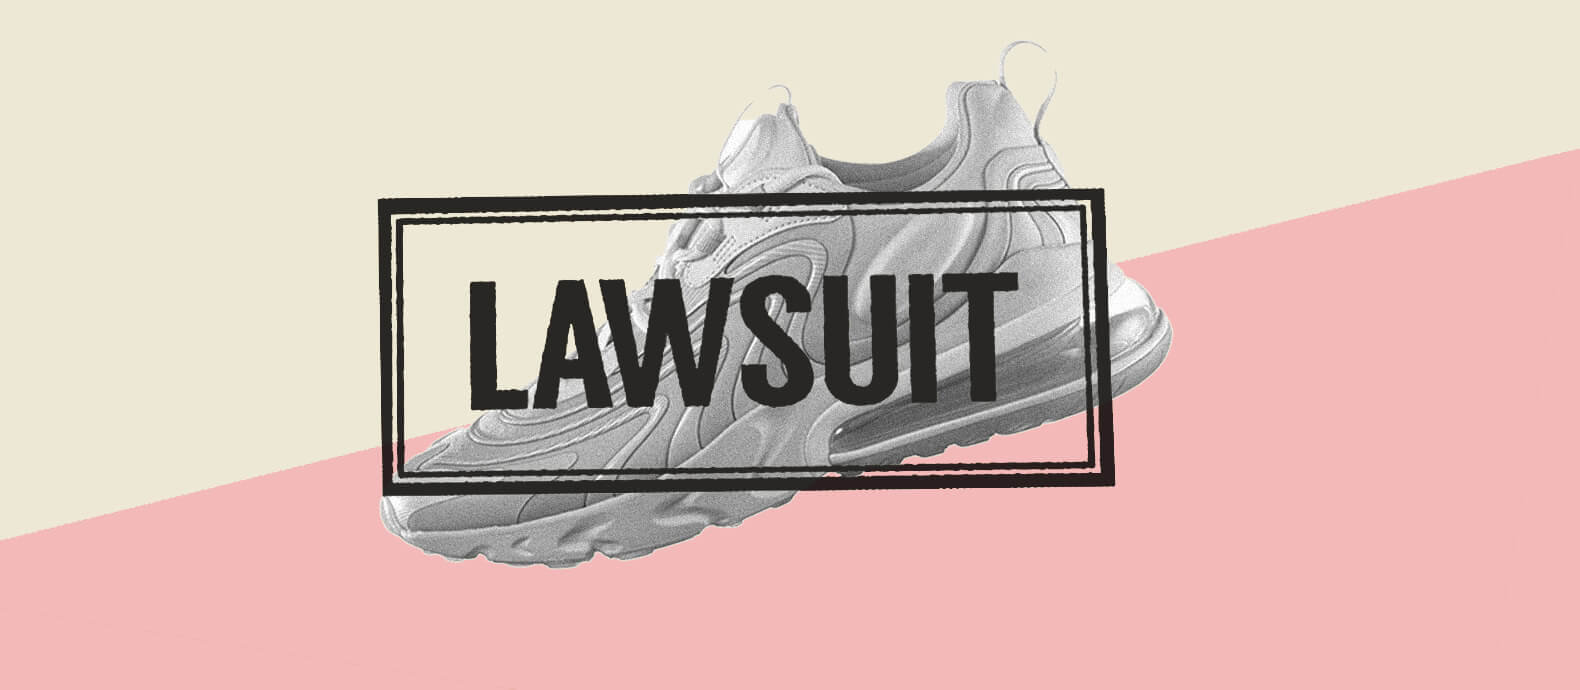 How to recover lost revenue with a counterfeit lawsuit